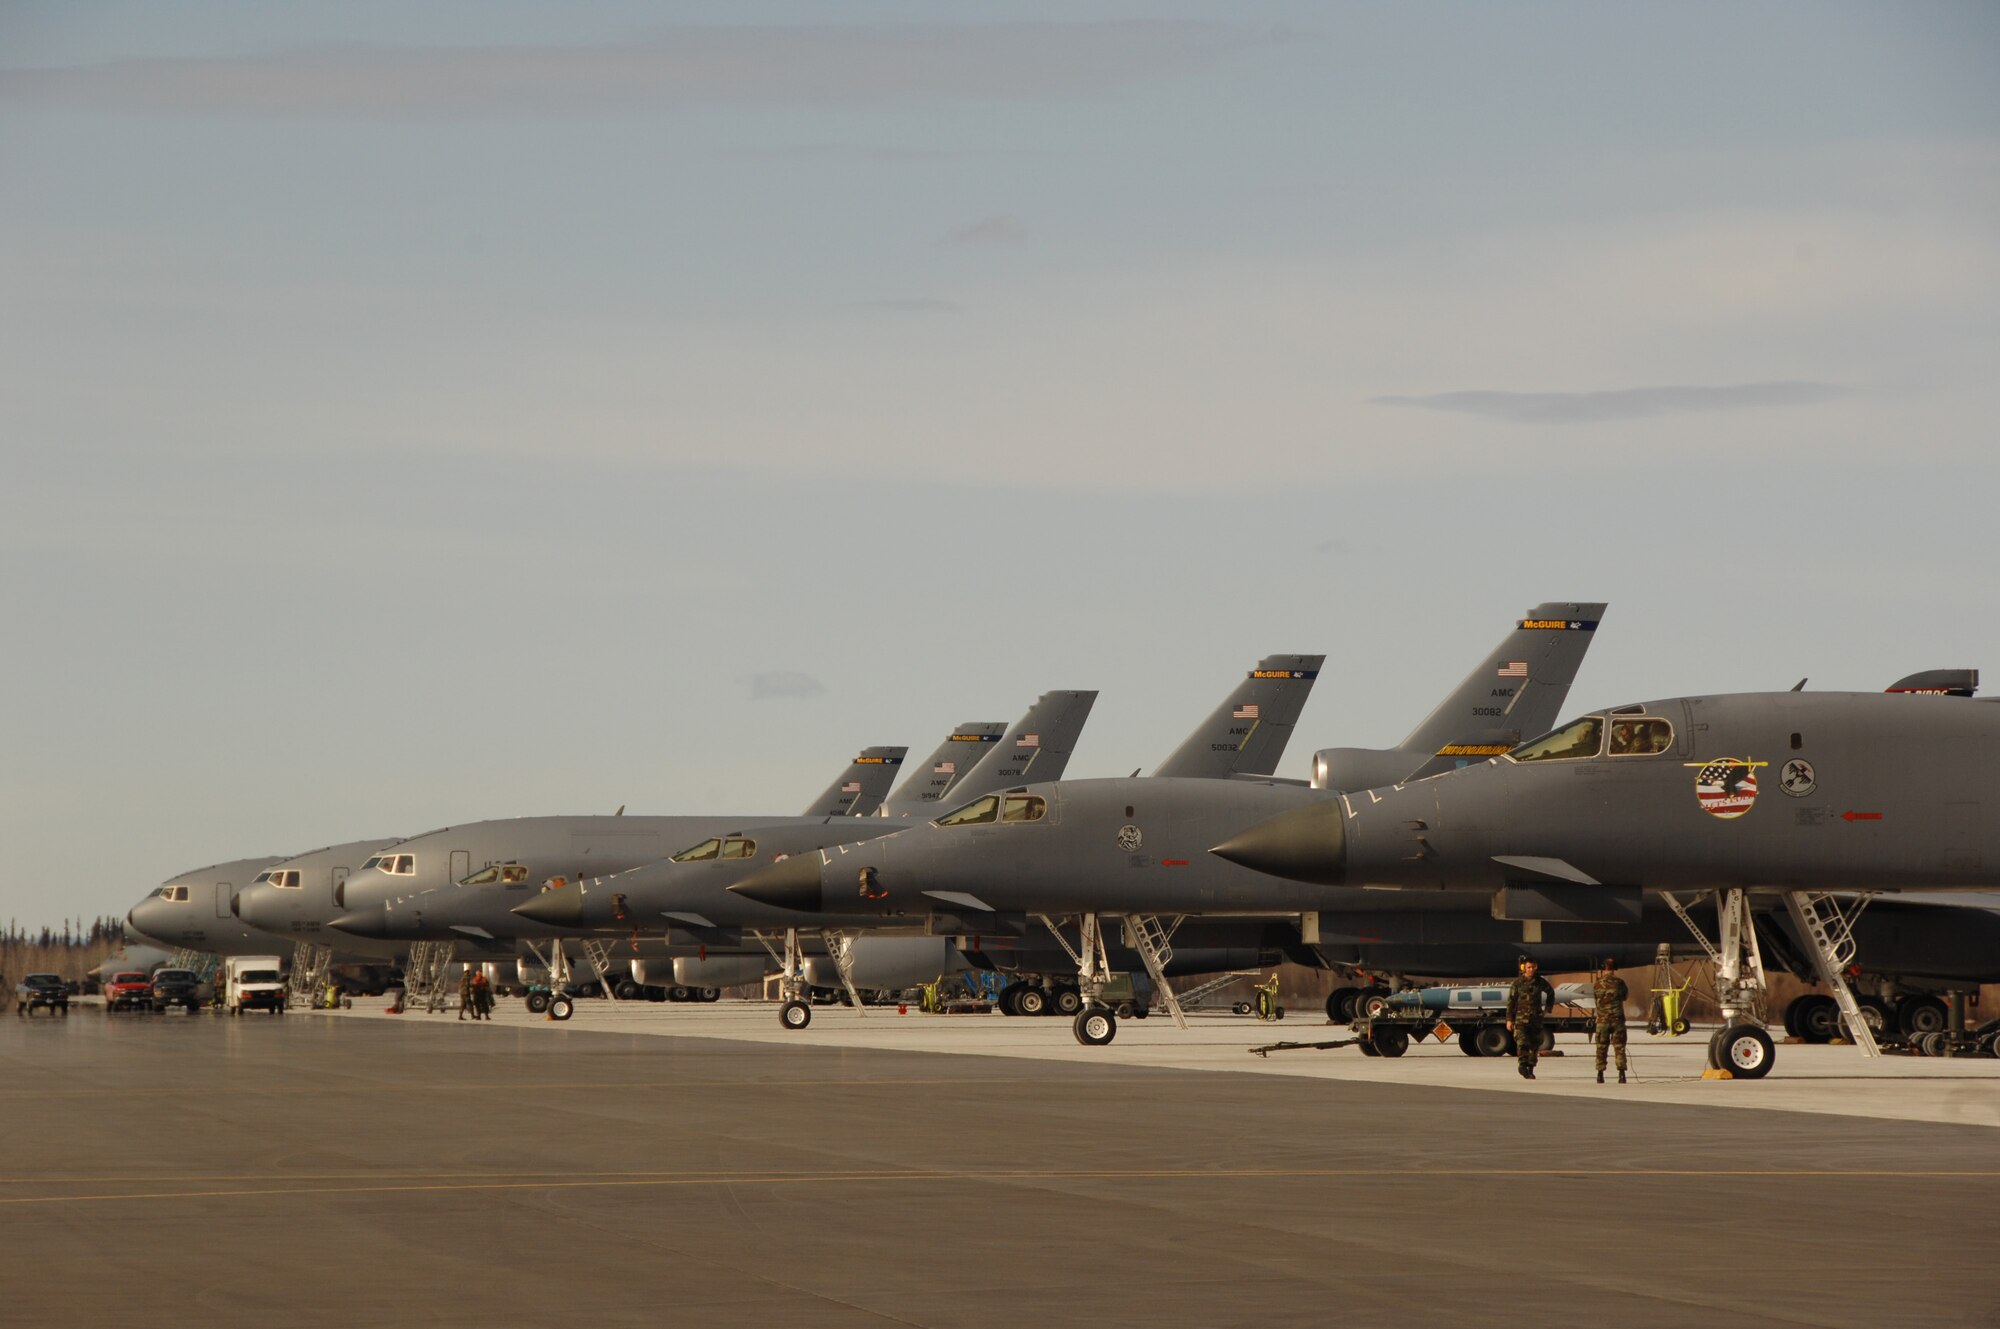 EIELSON AIR FORCE BASE, Alaska -- B-1B Lancers from Ellsworth Air Force Base, South Dakota, and KC-10 Extenders from McGuire Air Force Base, New Jersey, sit on the flightline here on Apr 9 during Red Flag-Alaska 07-1. Red Flag-Alaska enables aviation units to sharpen their combat skills by flying ten simulated combat sorties in a realistic threat environment. Additionally, the training allows them to exchange tactics, techniques, and procedures and improve interoperability.
(U.S. Air Force Photo by Staff Sgt Joshua Strang)